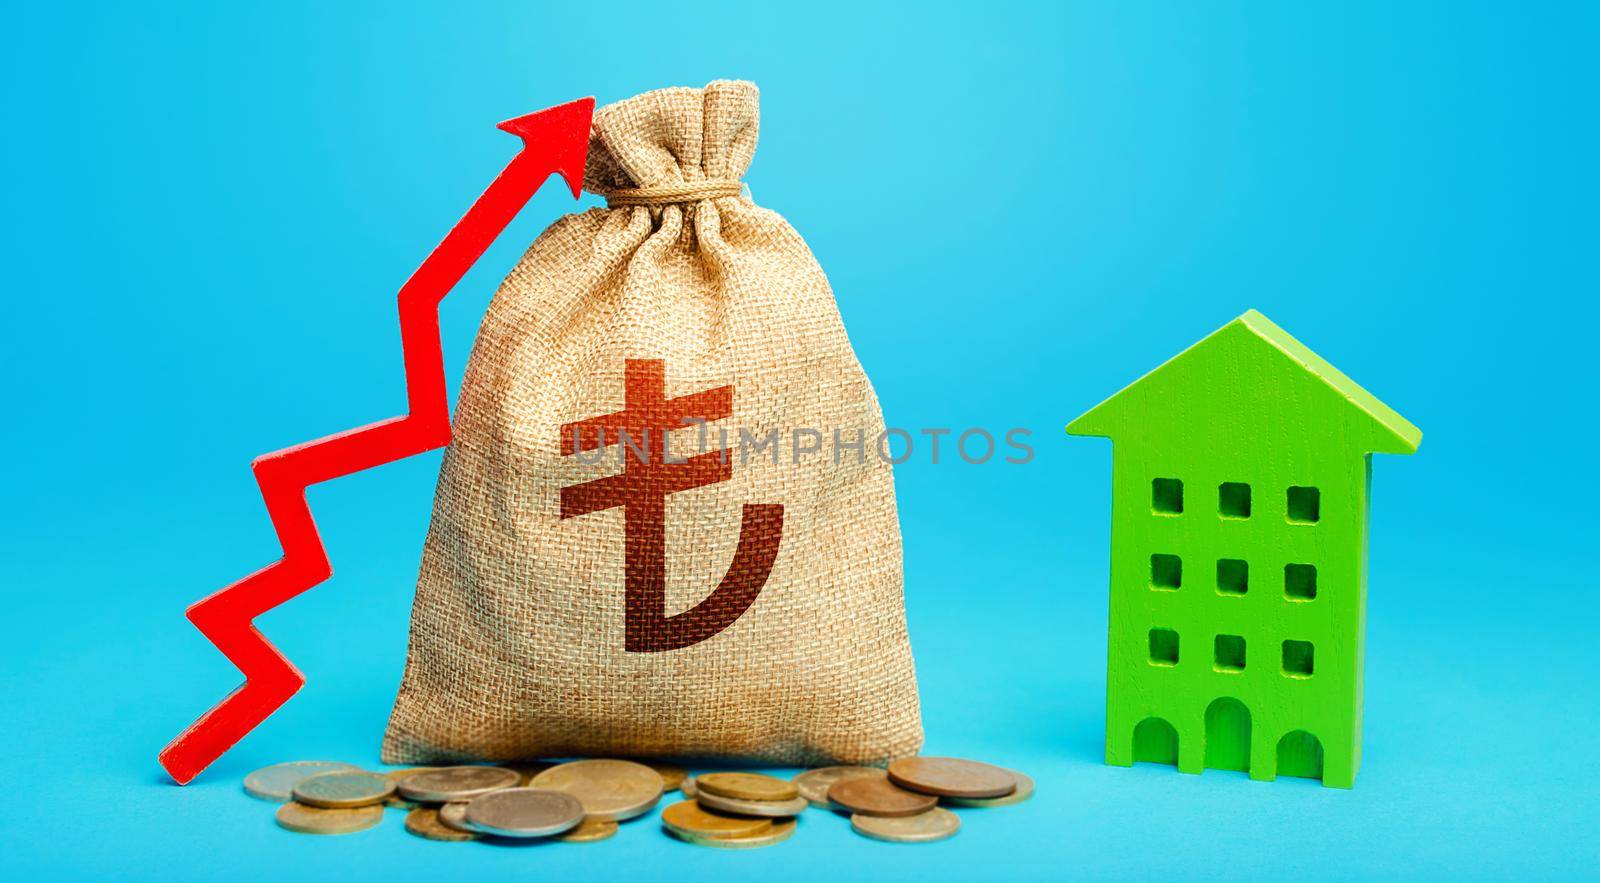 Turkish lira money bag with red up arrow and residential building. Increase in prices for apartments and housing. Municipal budget. Return on investment. Recovery and growth in property cost. by iLixe48